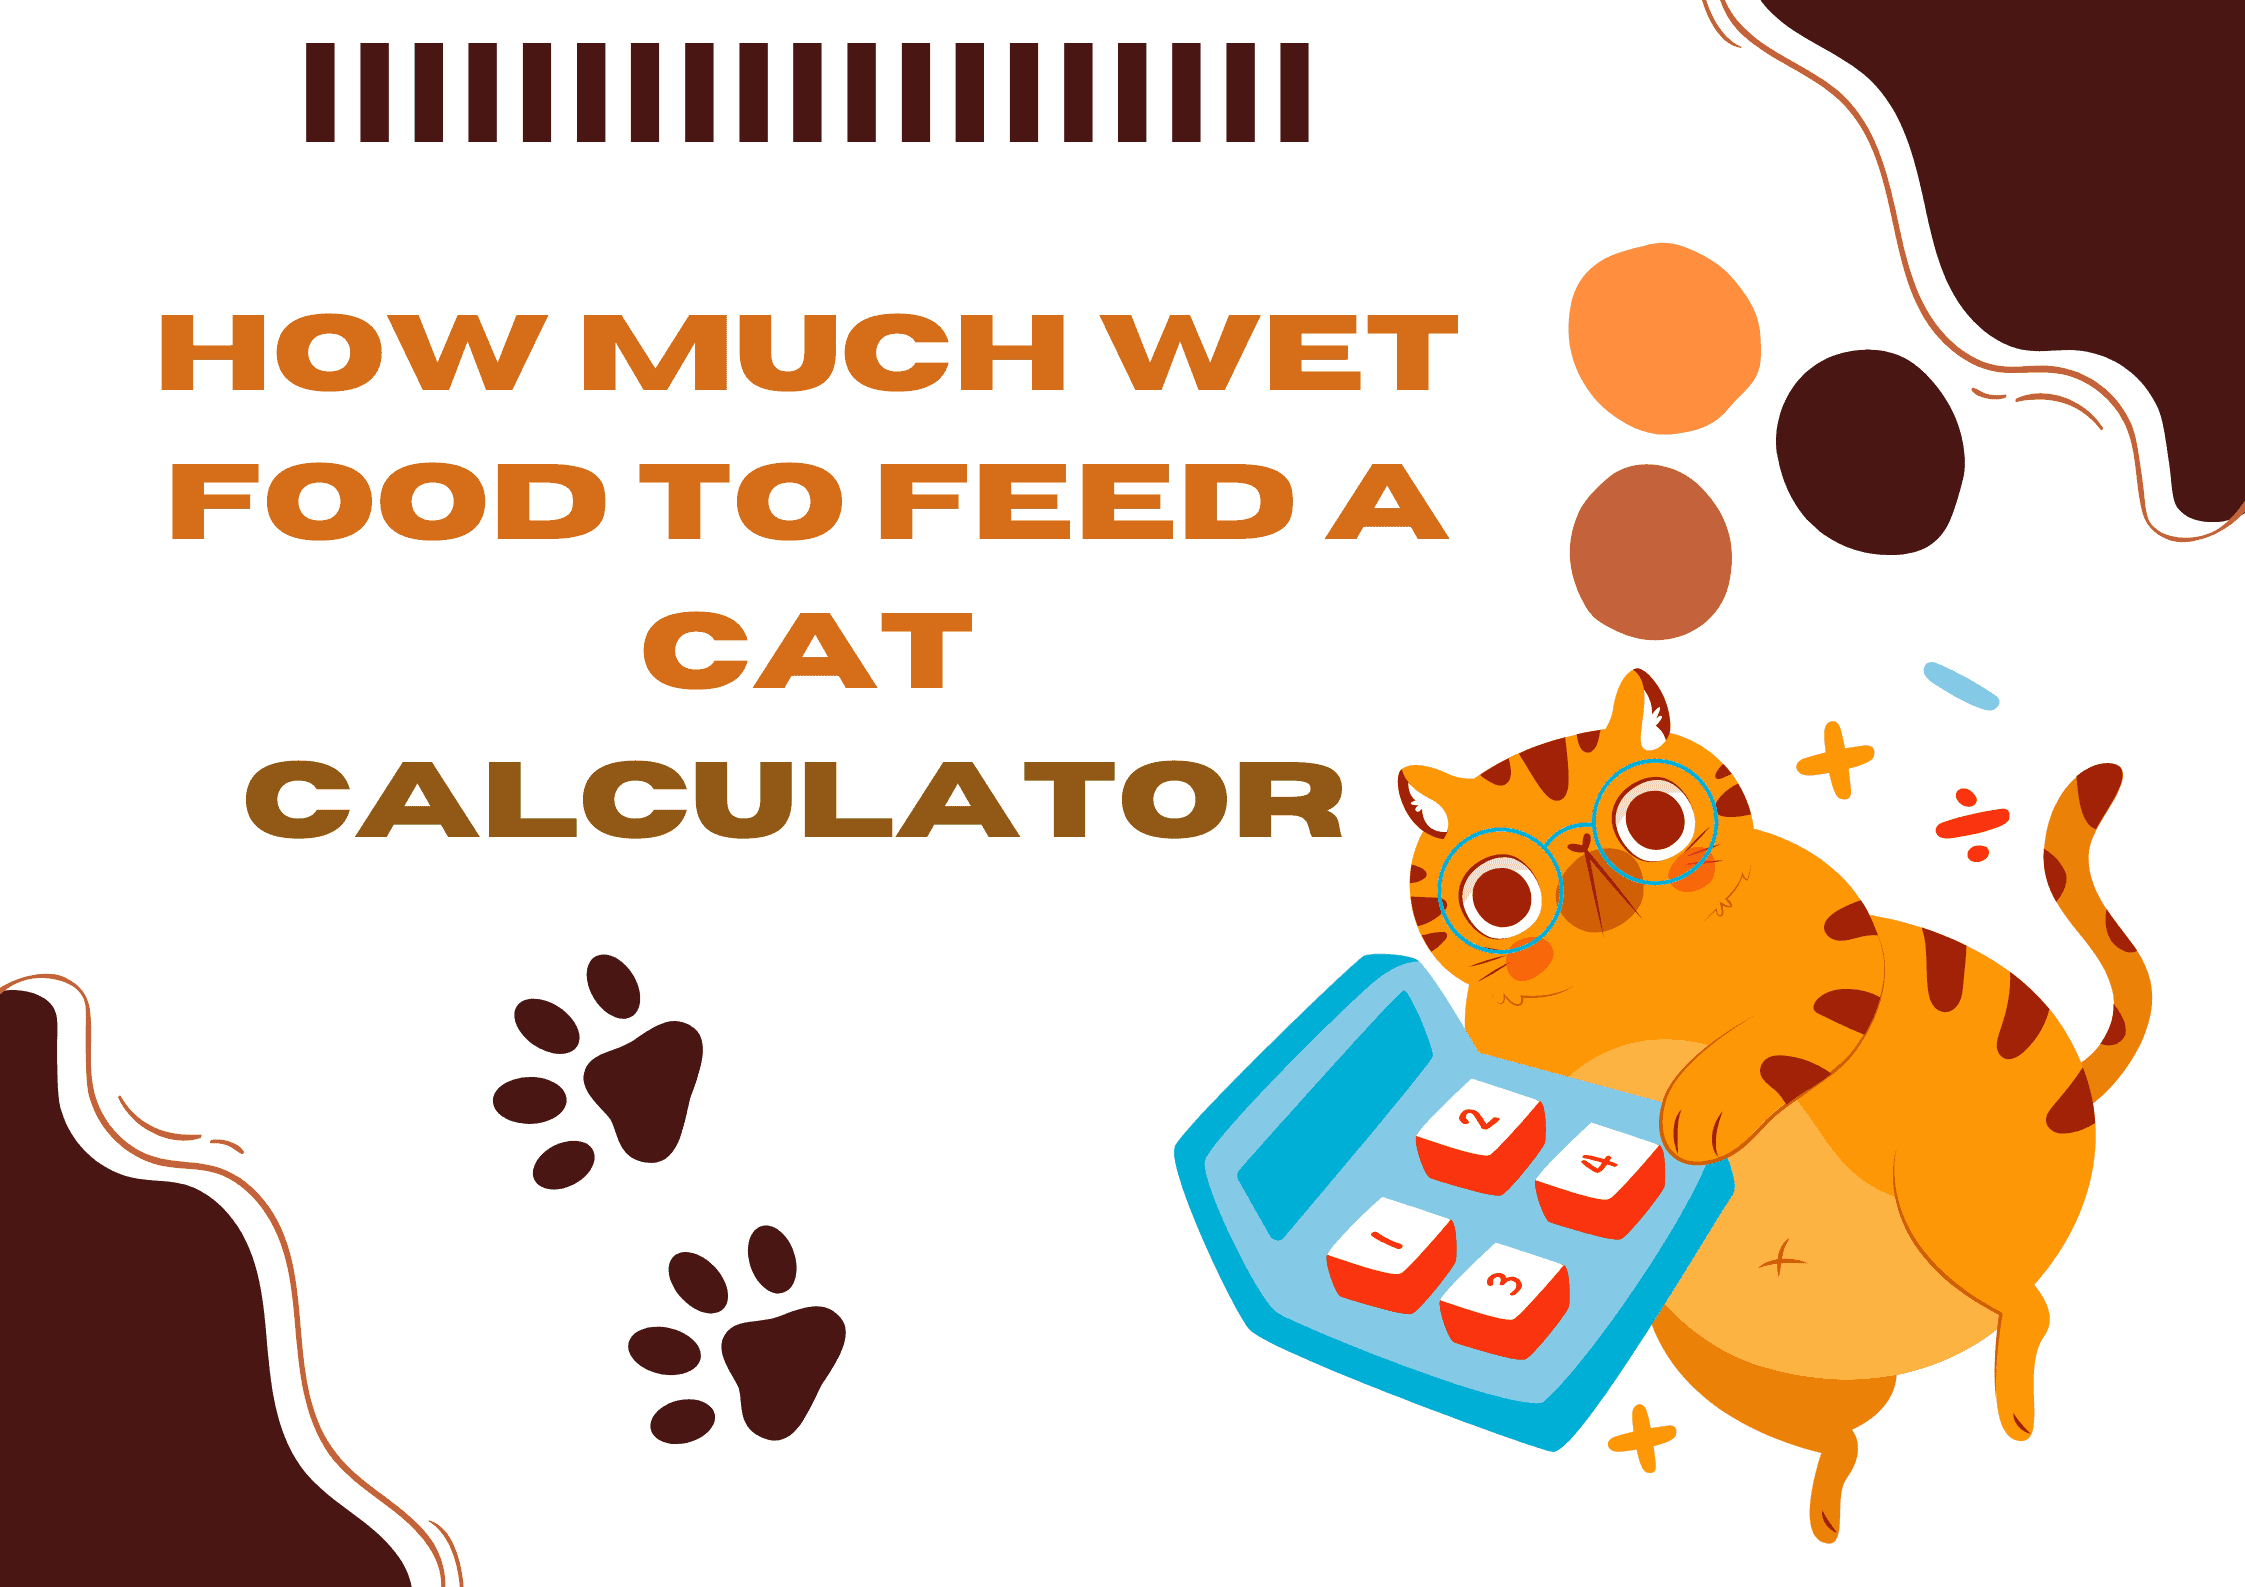 How much wet food to feed a cat calculator